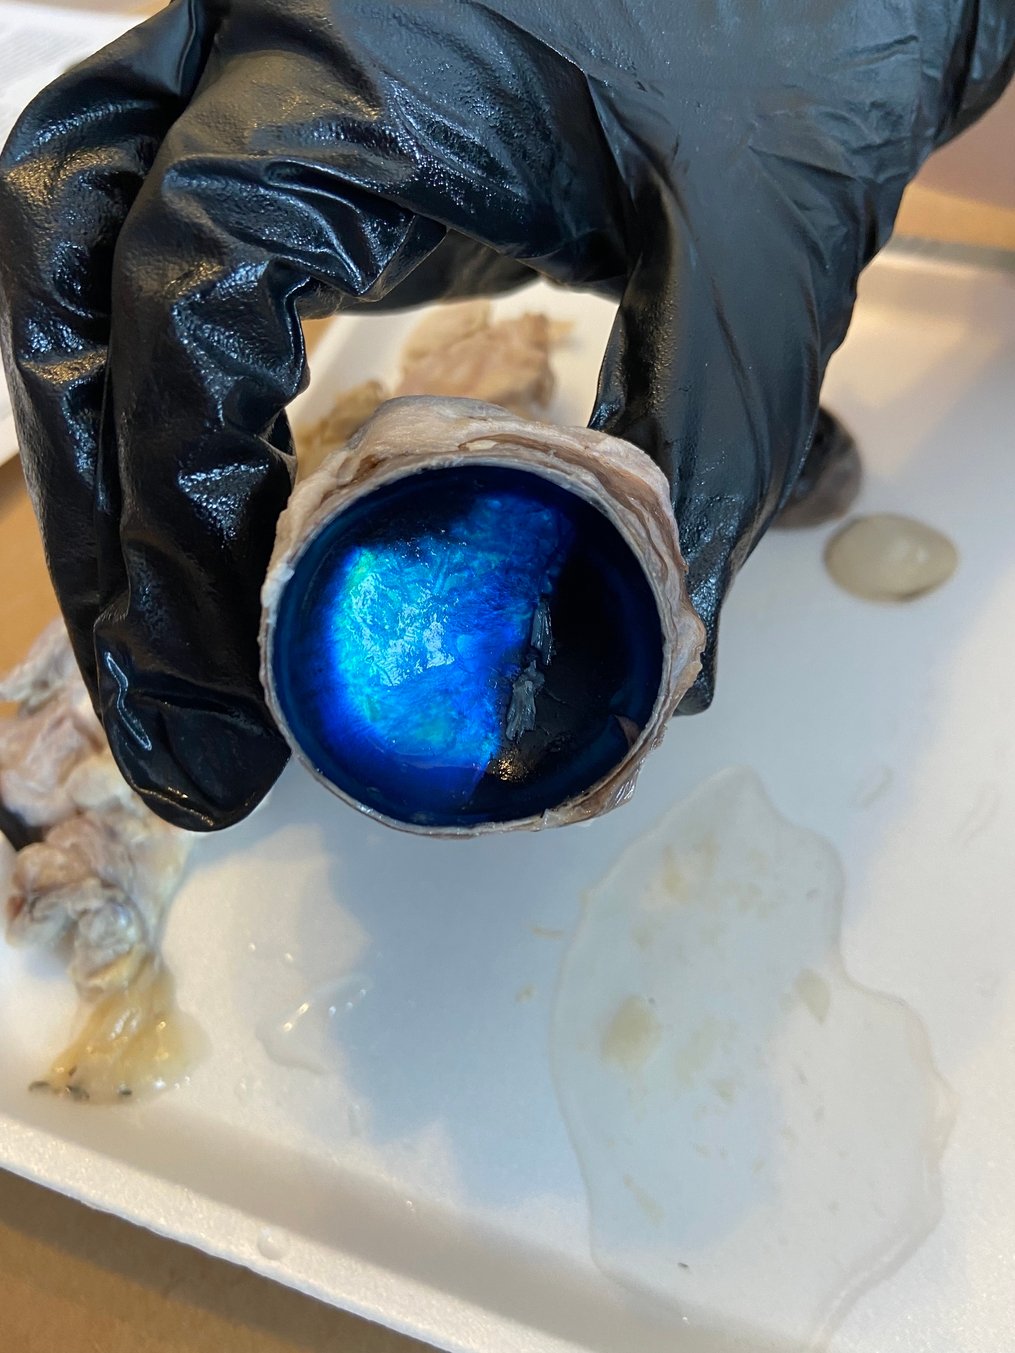 Cow Eye from lab dissection kit 